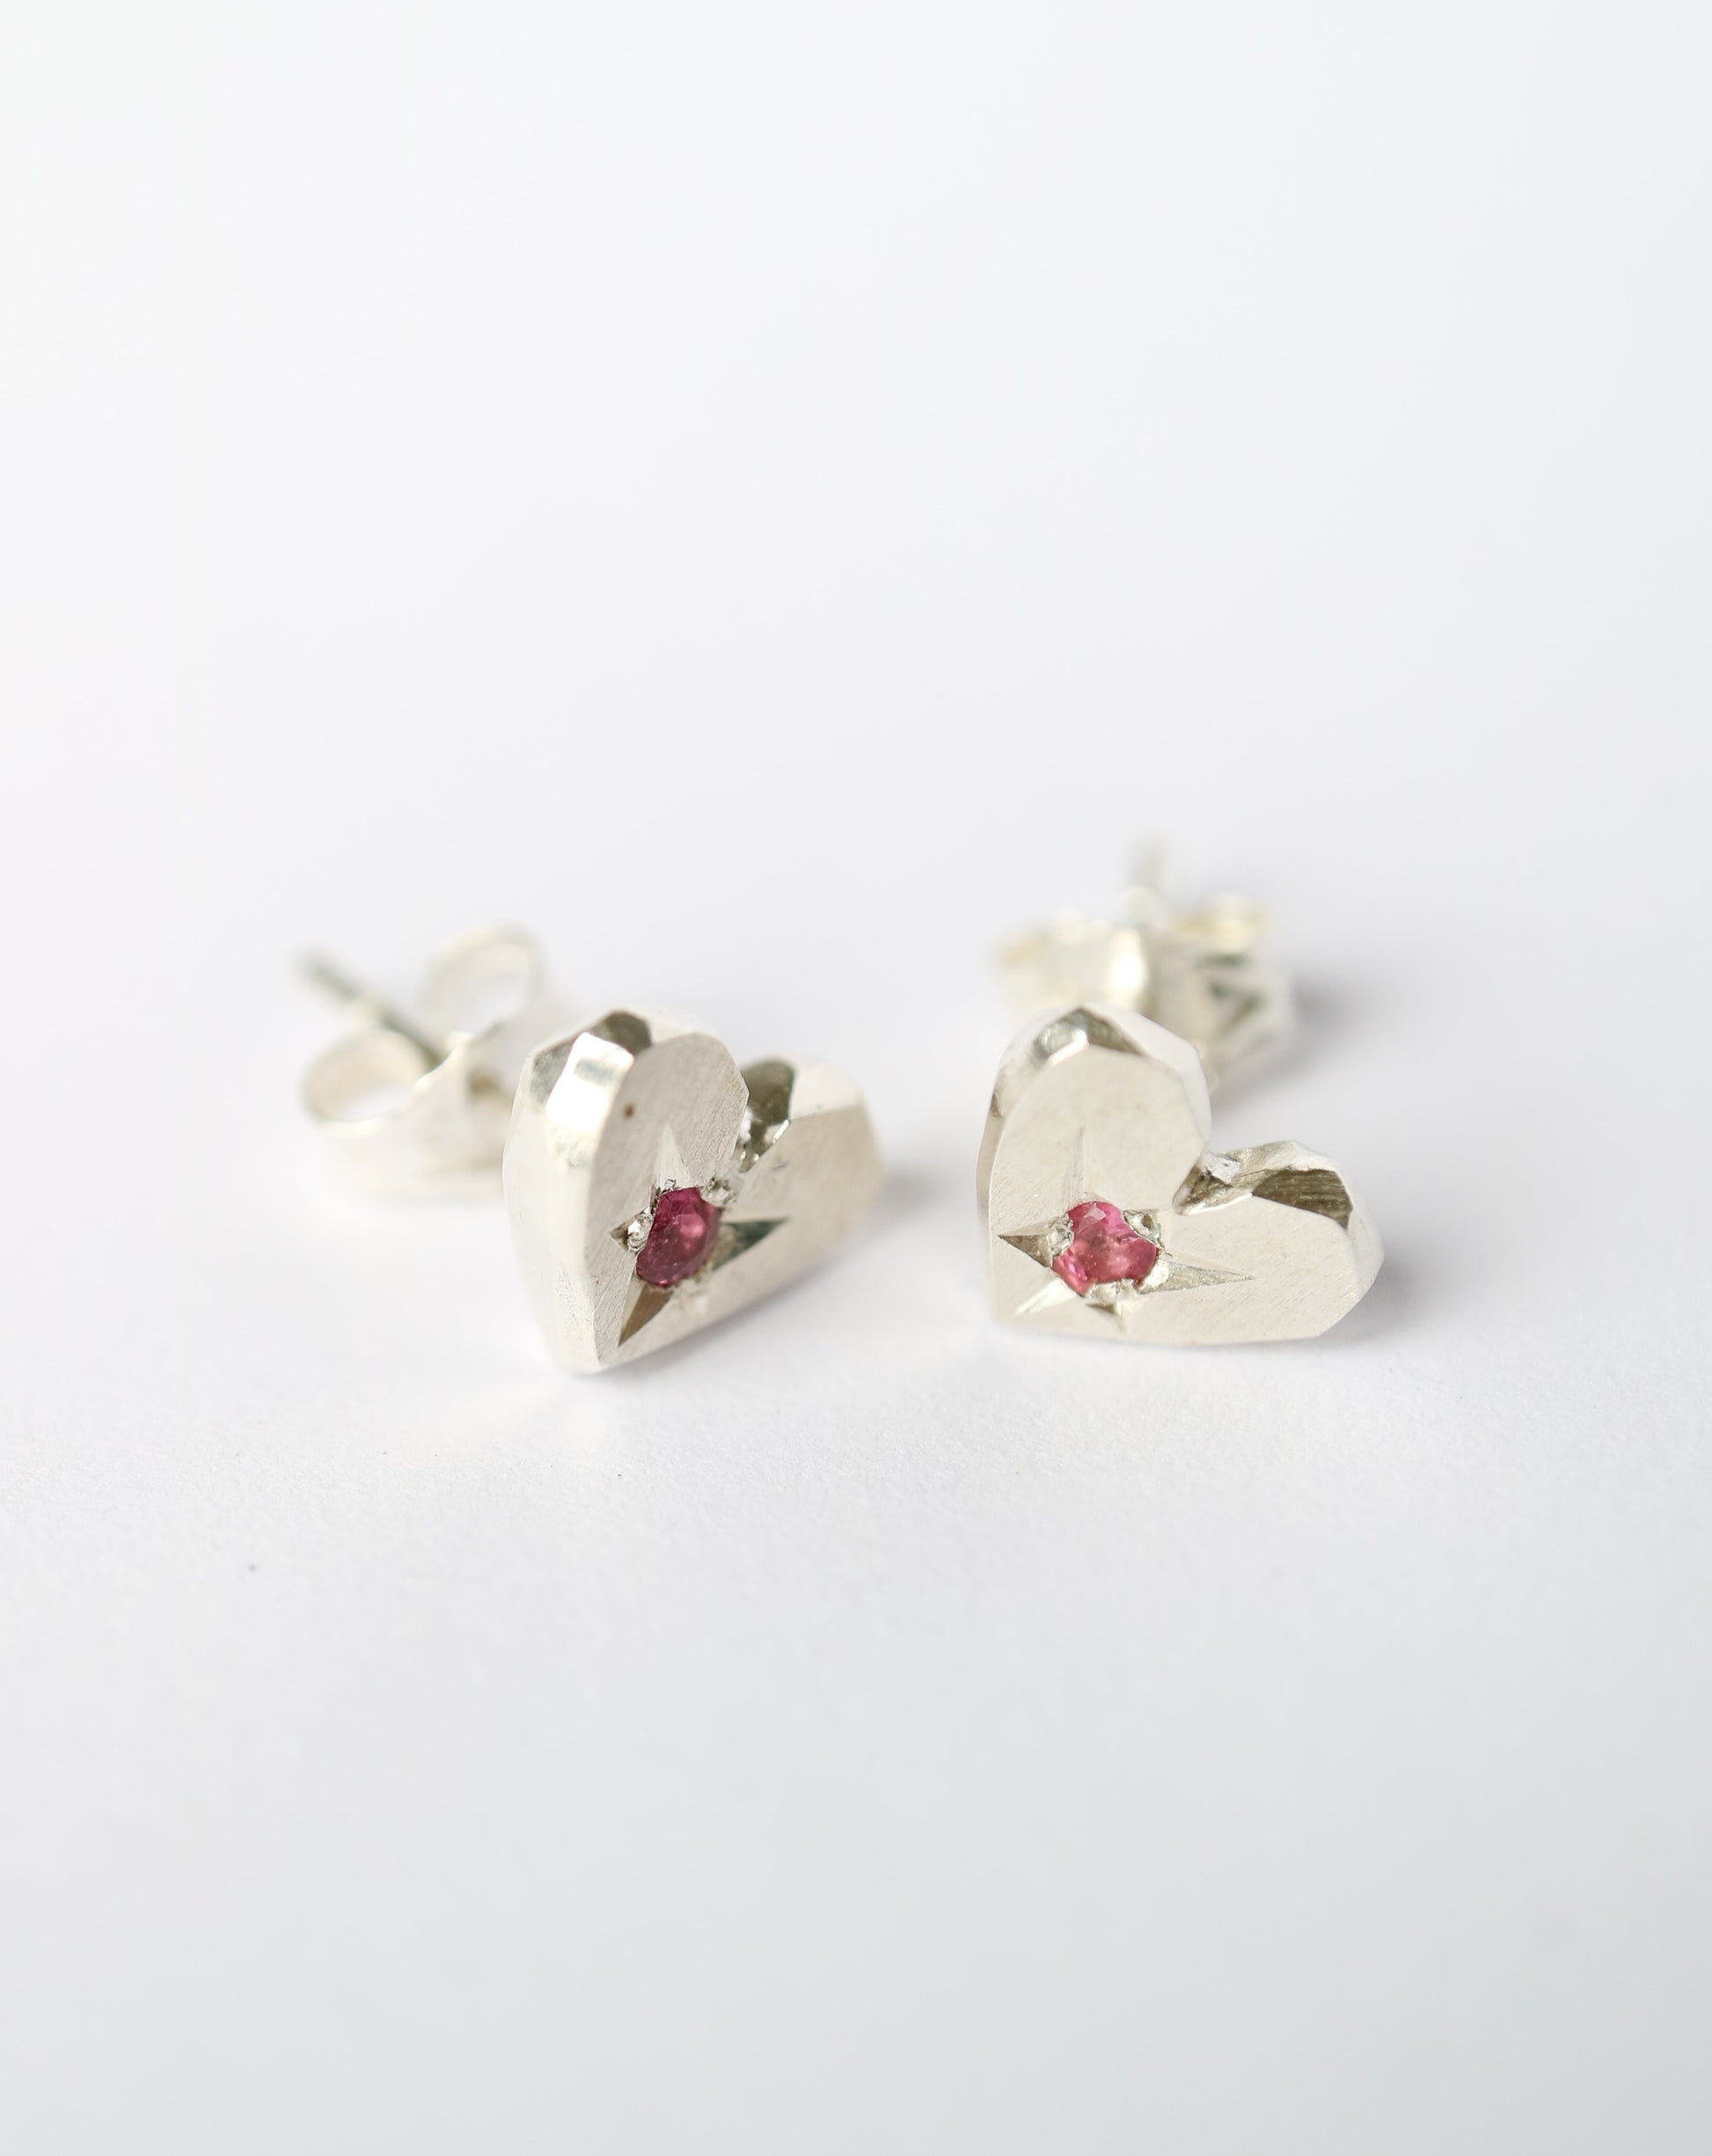 Heart Shaped Stud Earrings in solid sterling silver with pink tourmaline gemstones